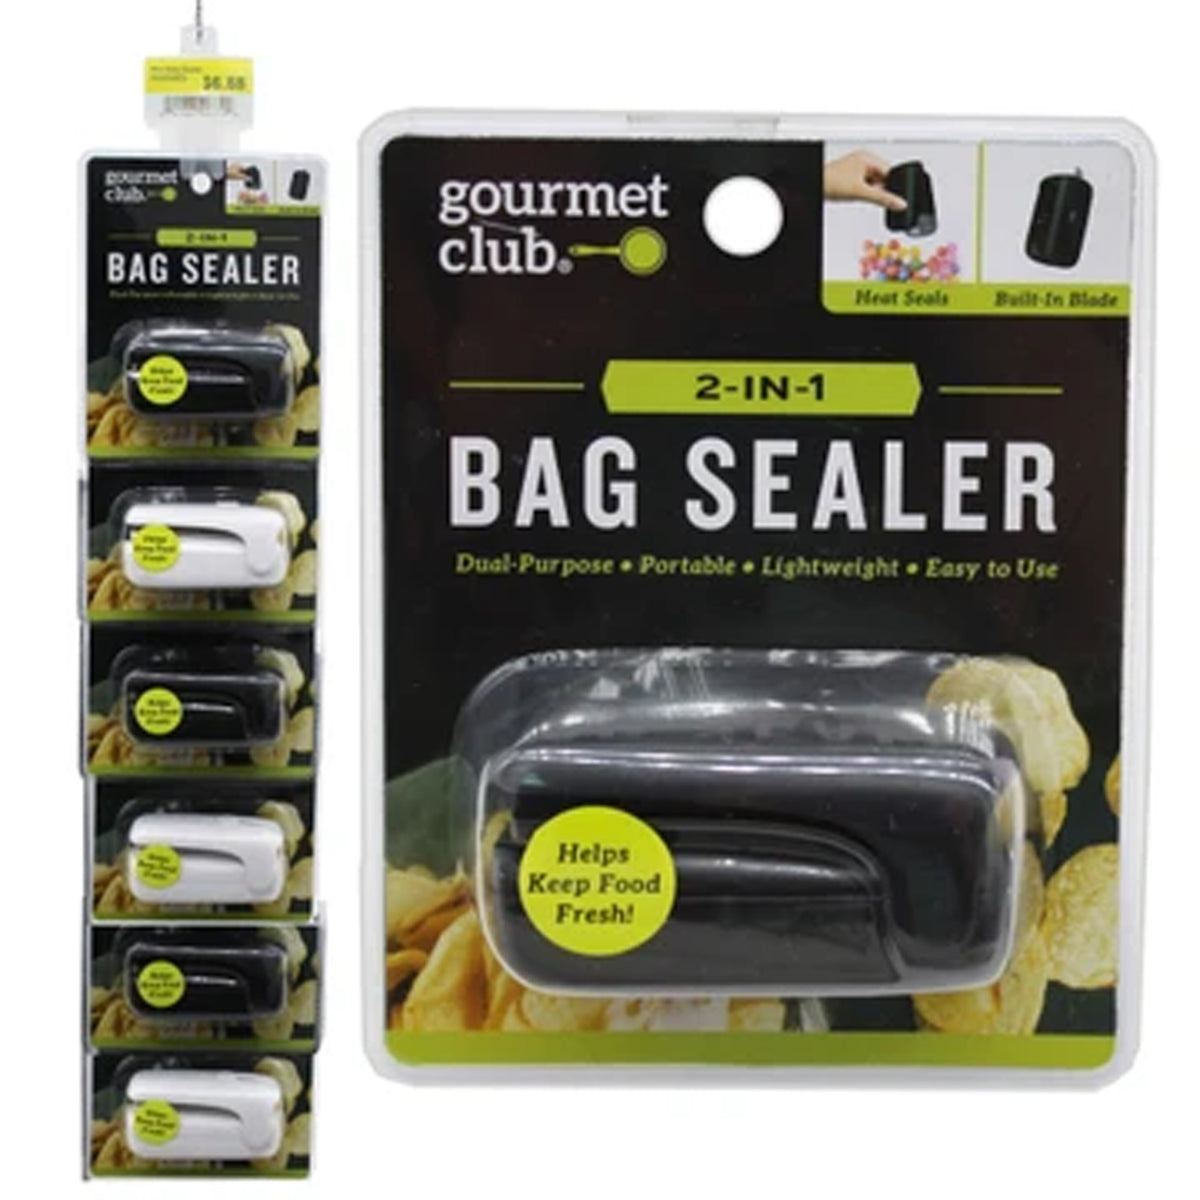 Keep Your Food Fresh with our Lightweight 2-in-1 Bag Sealer